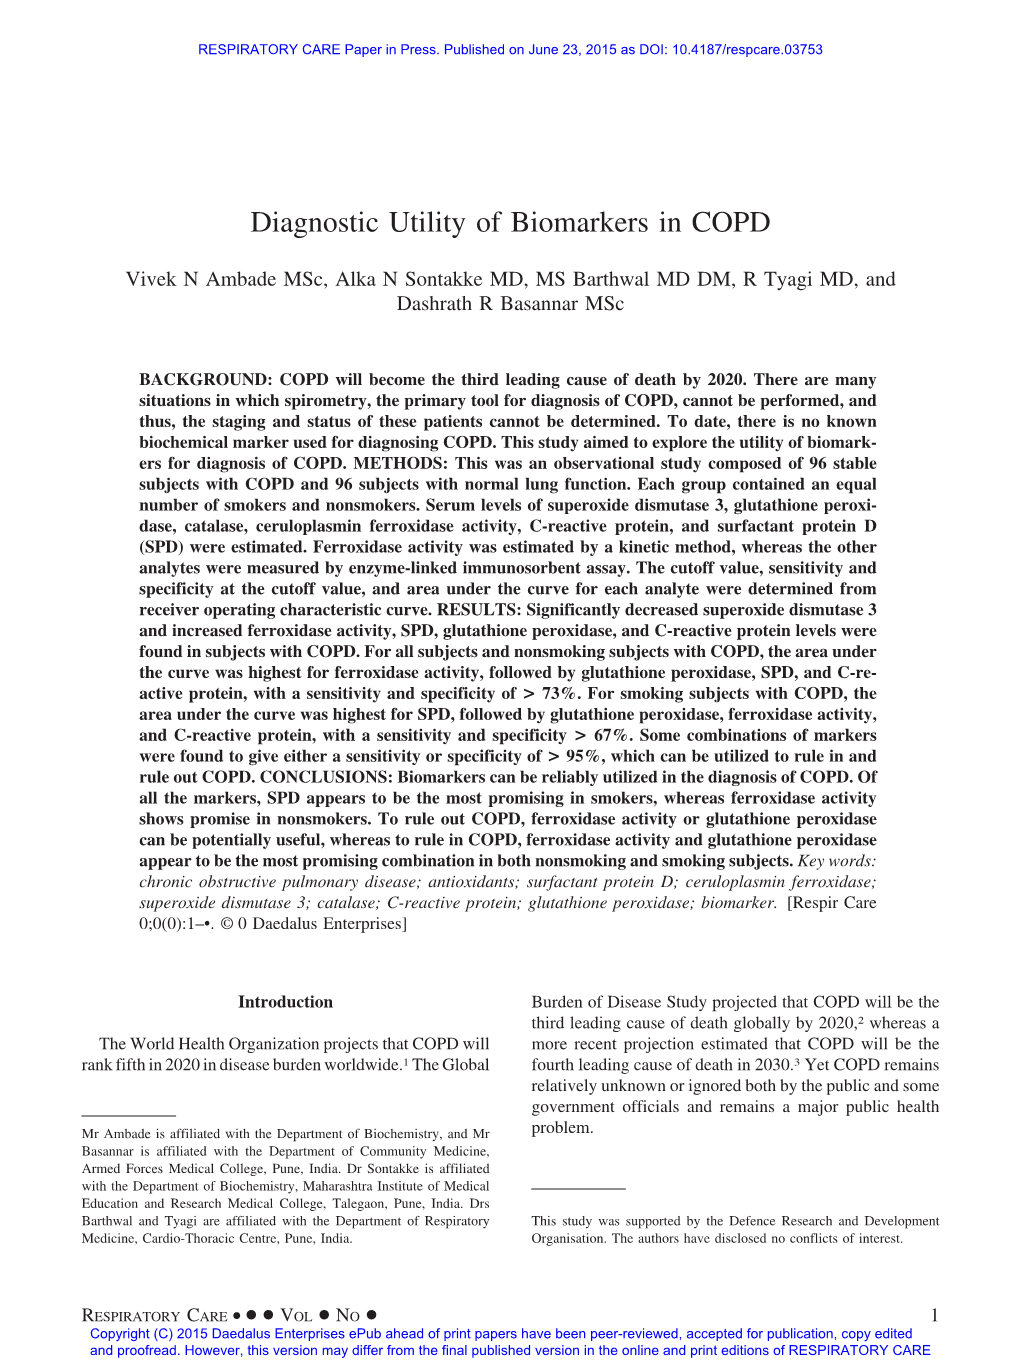 Diagnostic Utility of Biomarkers in COPD